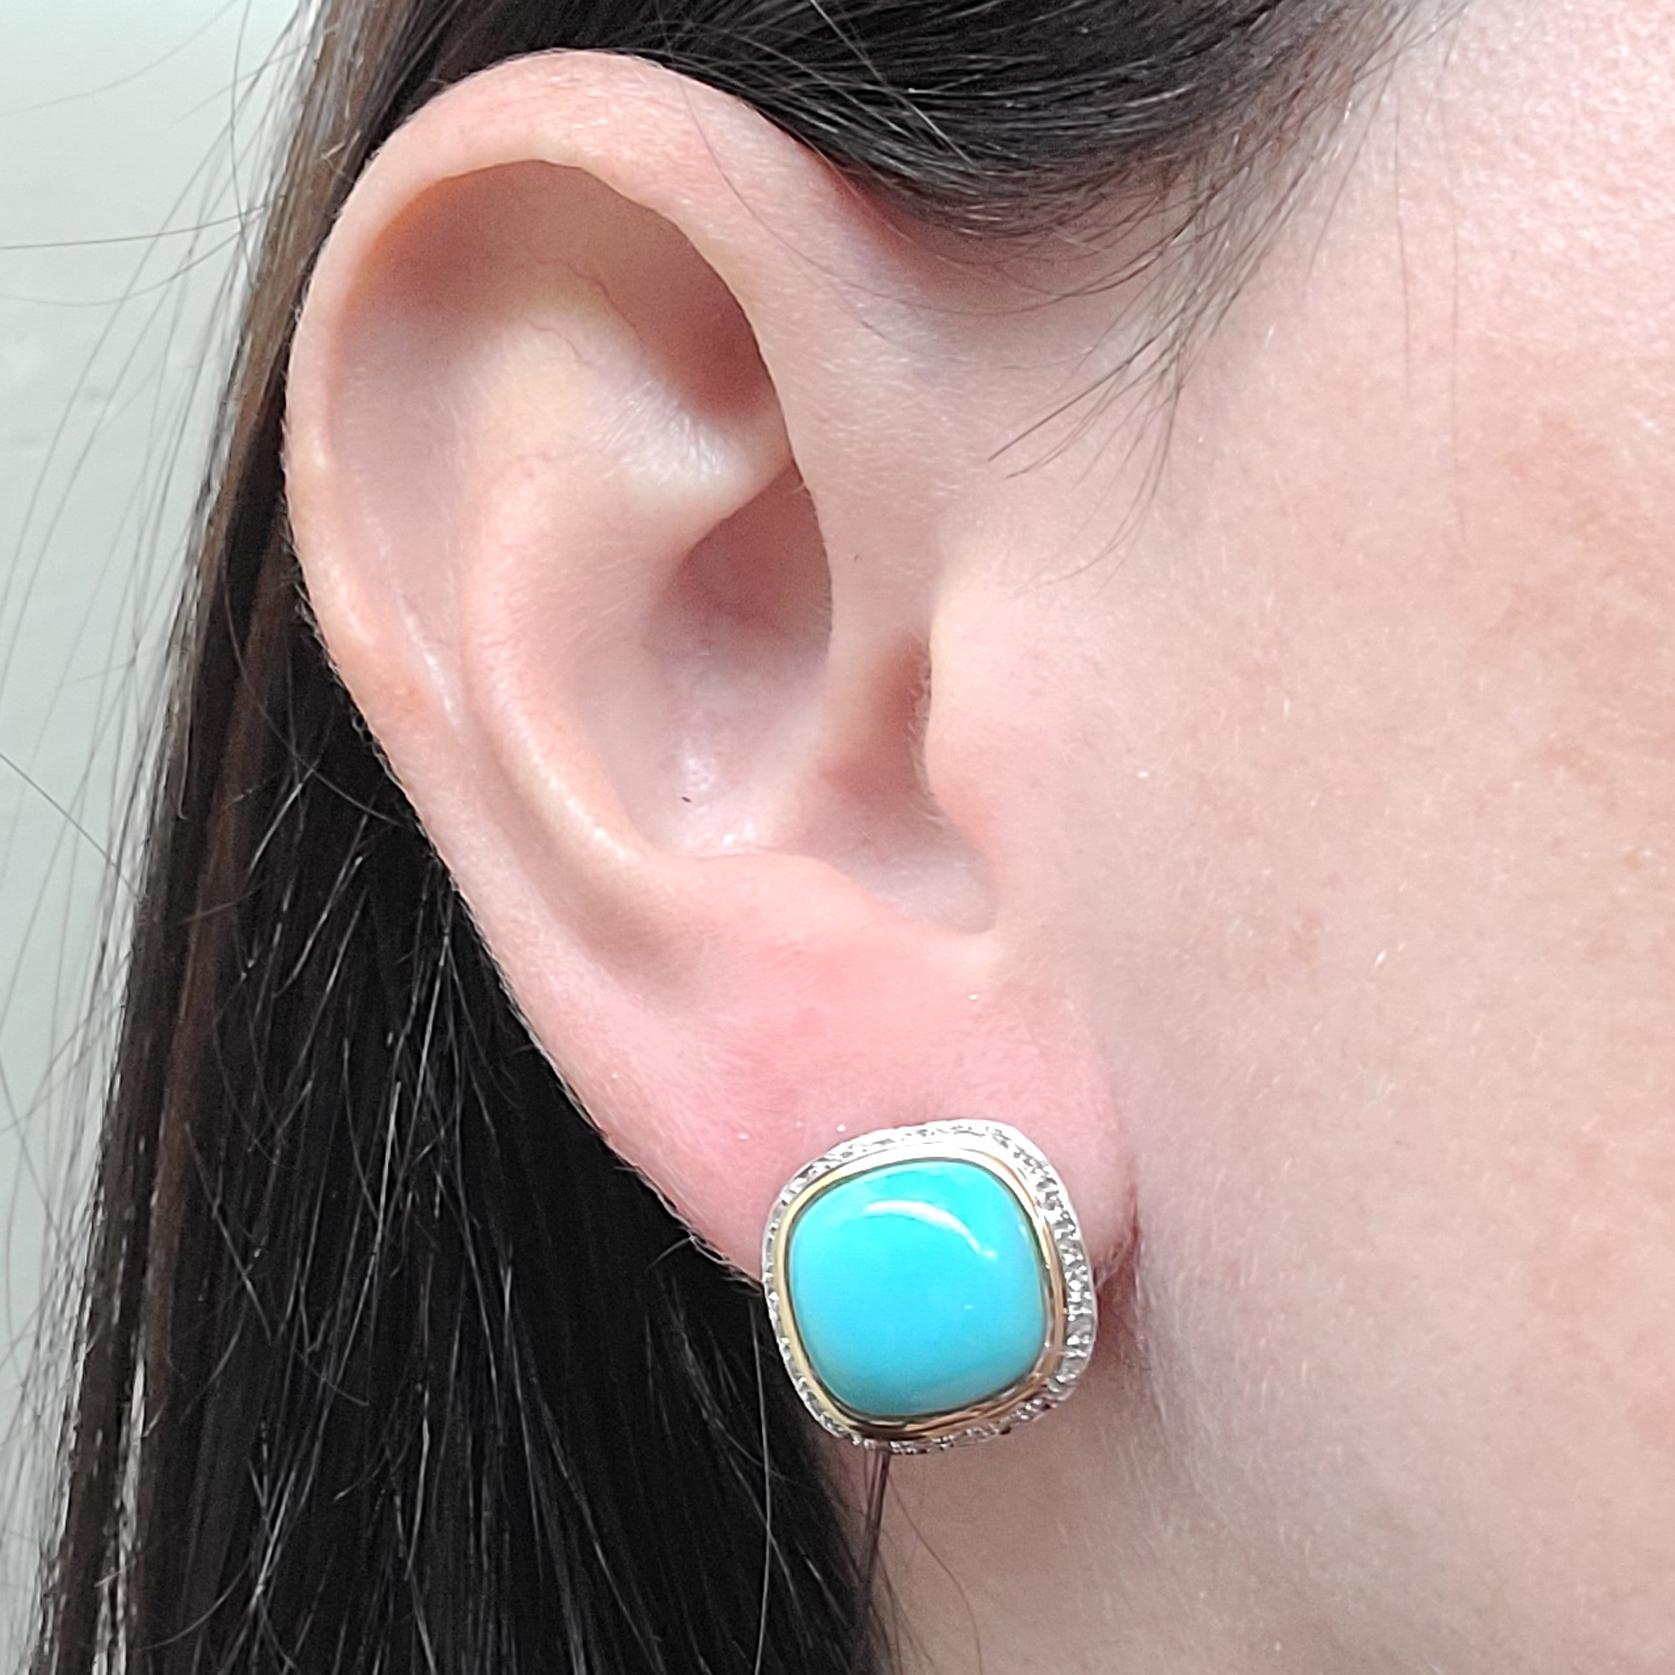 14 Karat Yellow Gold Pair Of Stud Earrings Featuring 2 Bezel Set Cushion Cut Cabochon Turquoise Surrounded By 52 Round Brilliant Cut Diamonds Totaling Approximately 0.26 Carats. Pierced Post With Omega Clip Back. Post Can Be Removed Upon Request.